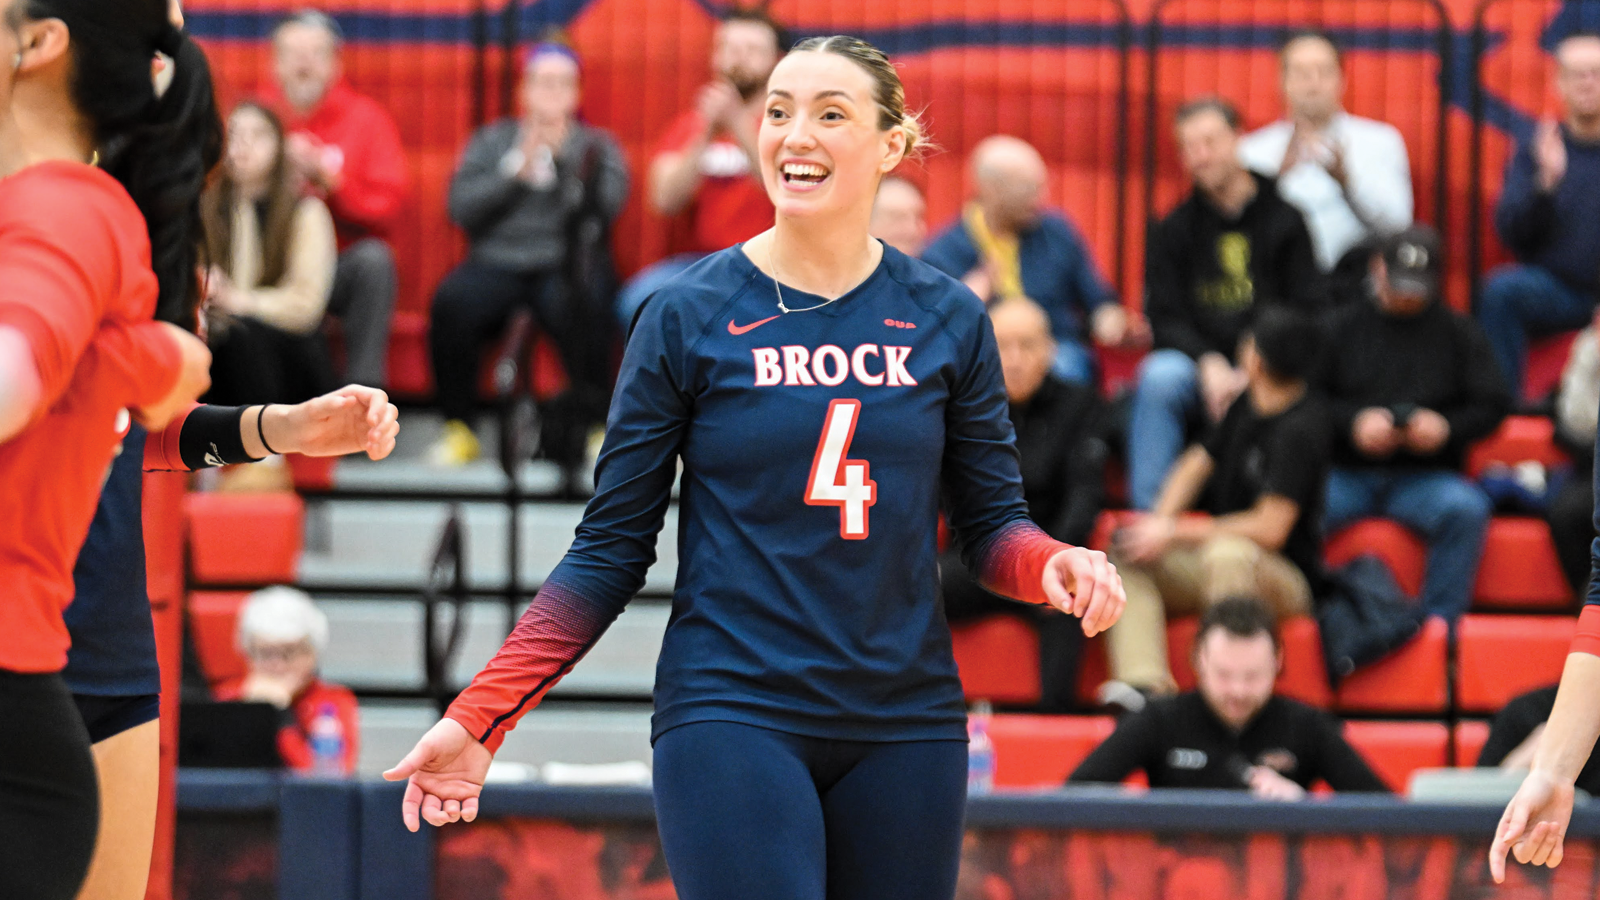 Brock women's volleyball player Sara Rohr smiling on the court in between points of a game